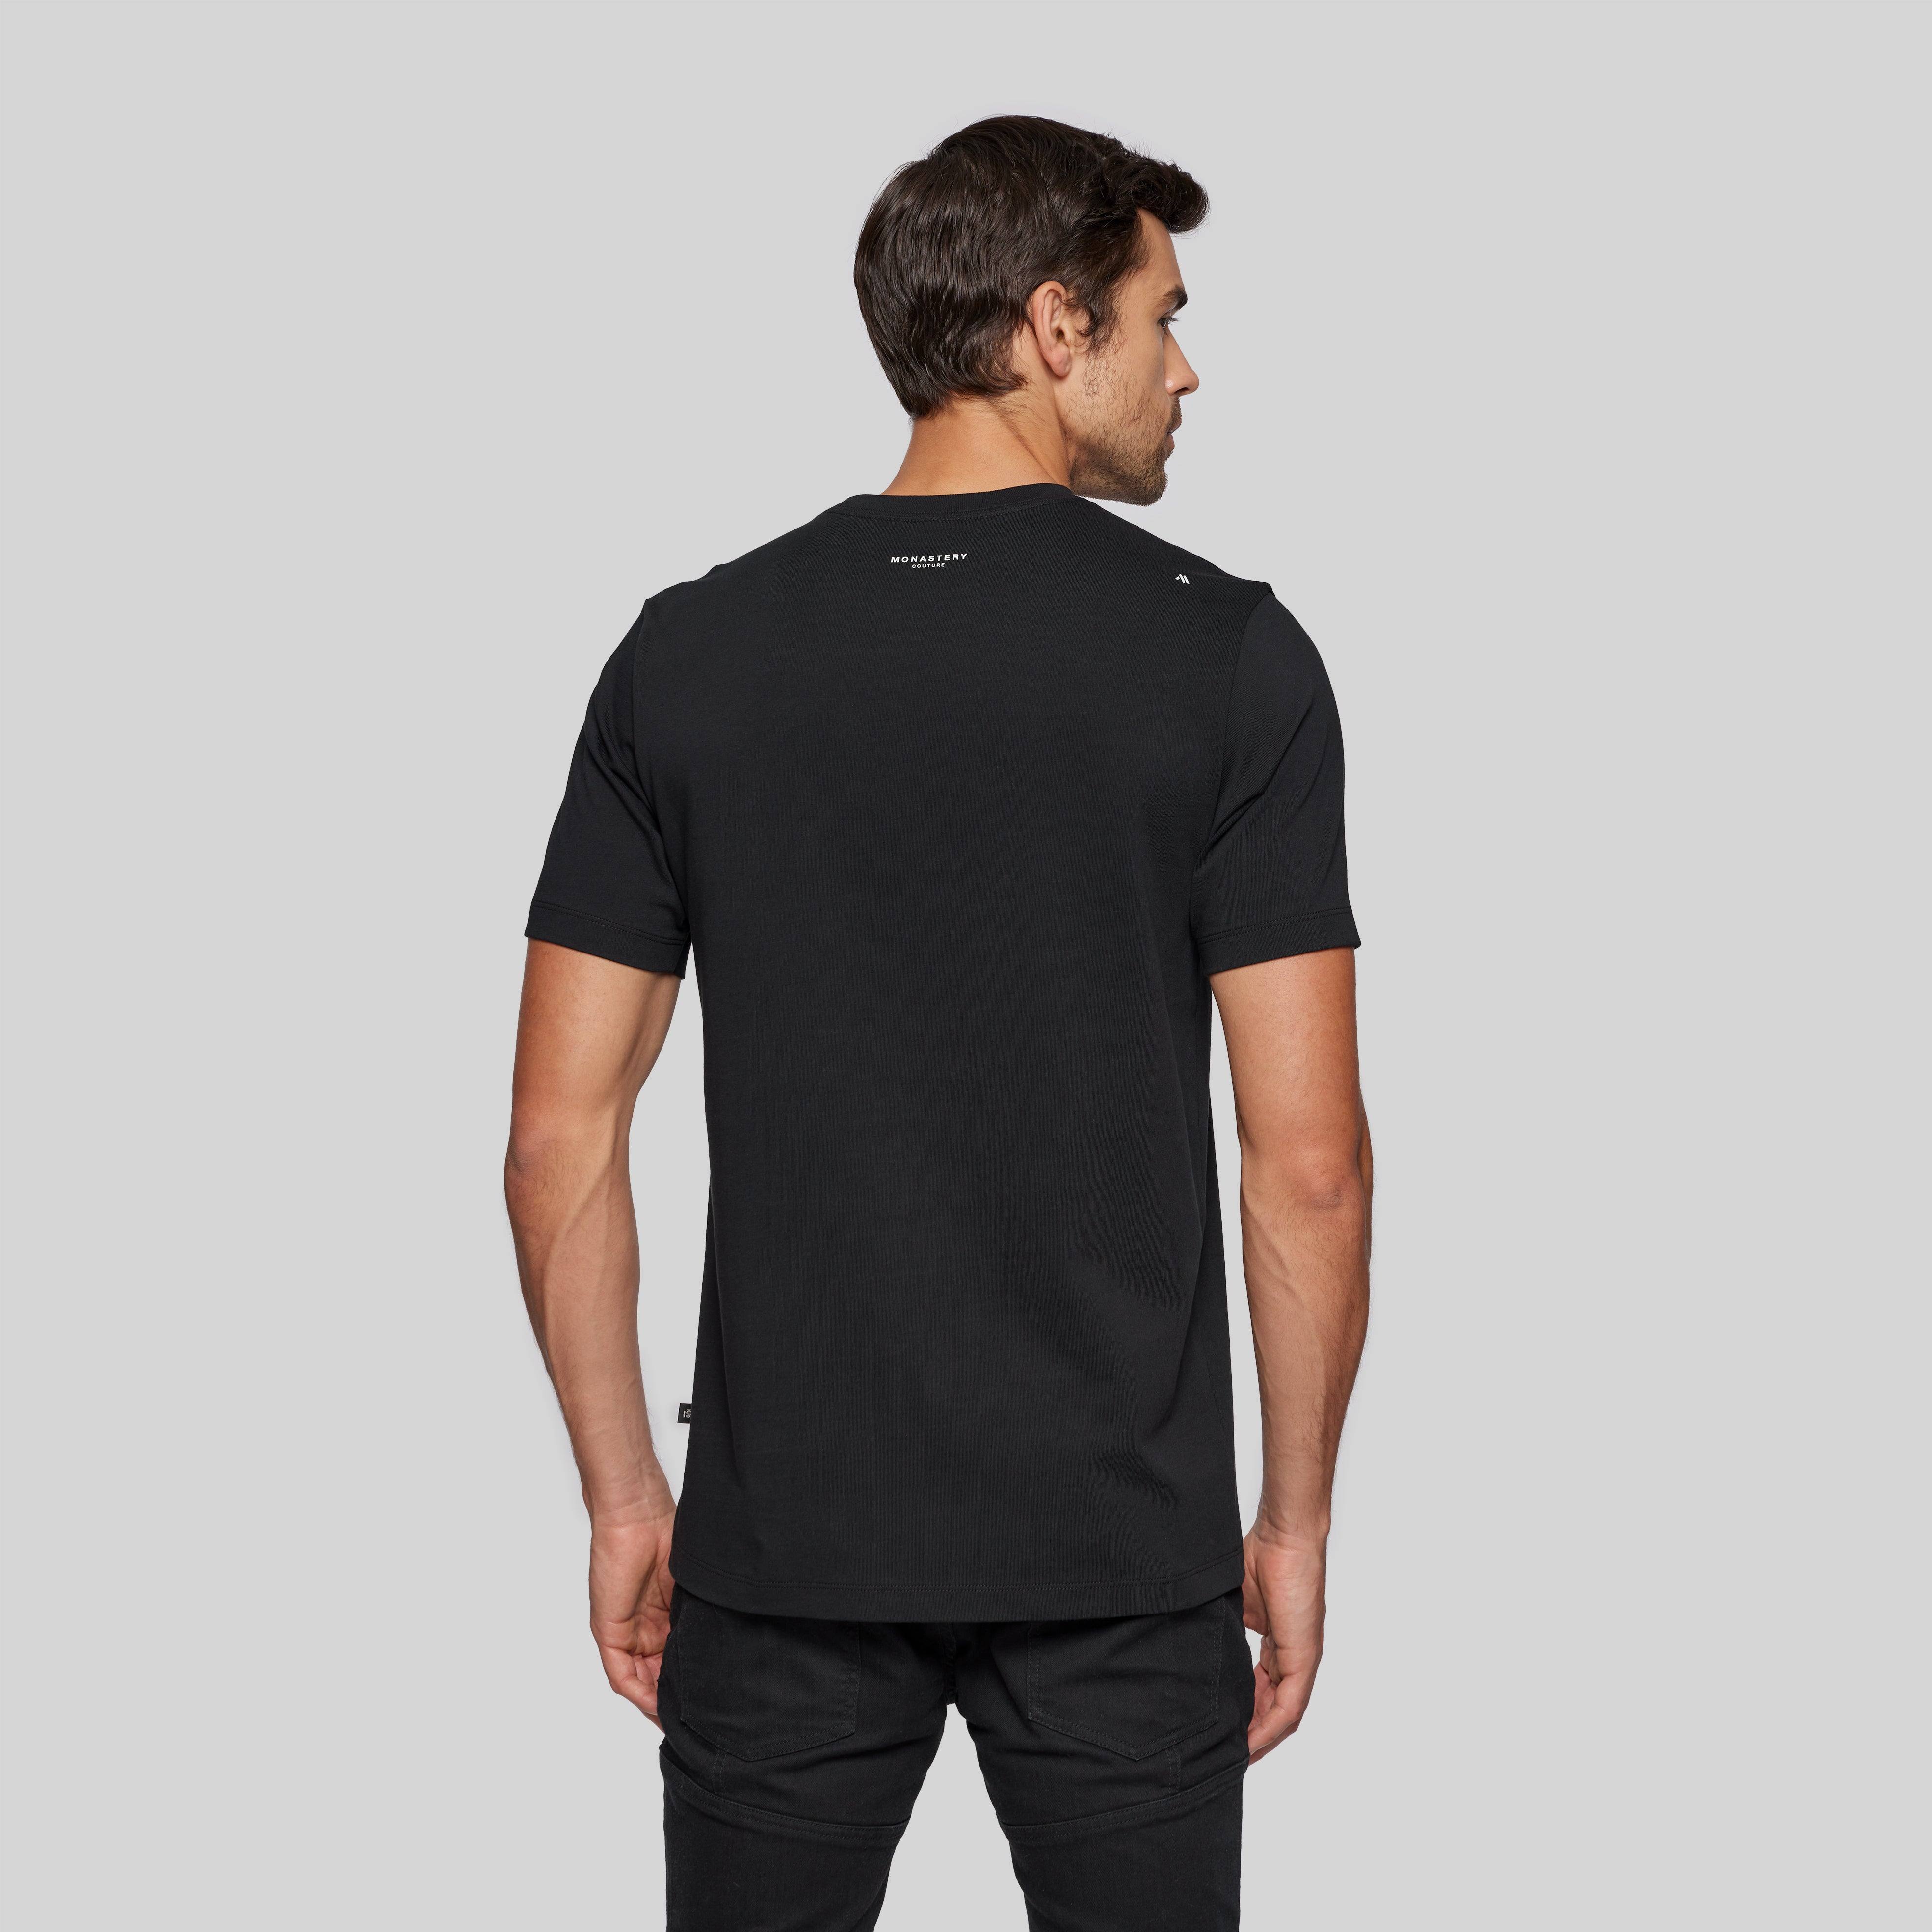 RIGEL BLACK T-SHIRT | Monastery Couture